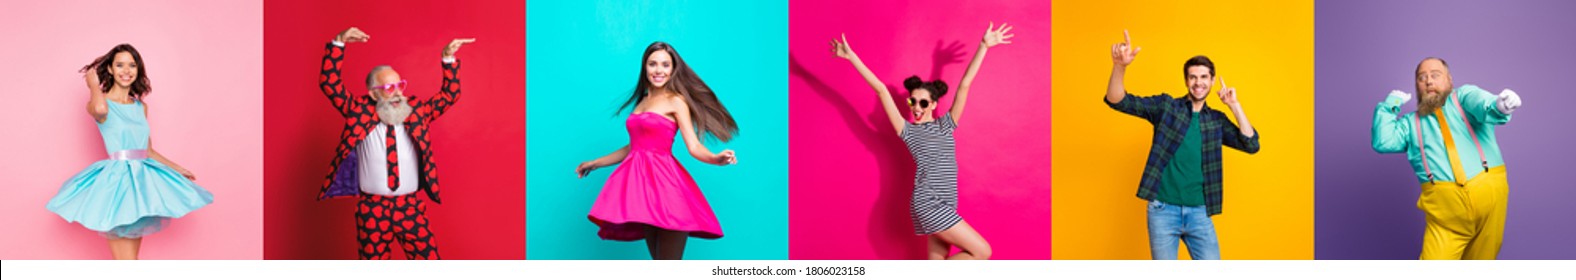 Collage photo six cool funny active modern people diversity fancy ladies hipster guys men good mood discotheque festive clubbers isolated many colors violet teal yellow pink red background - Shutterstock ID 1806023158